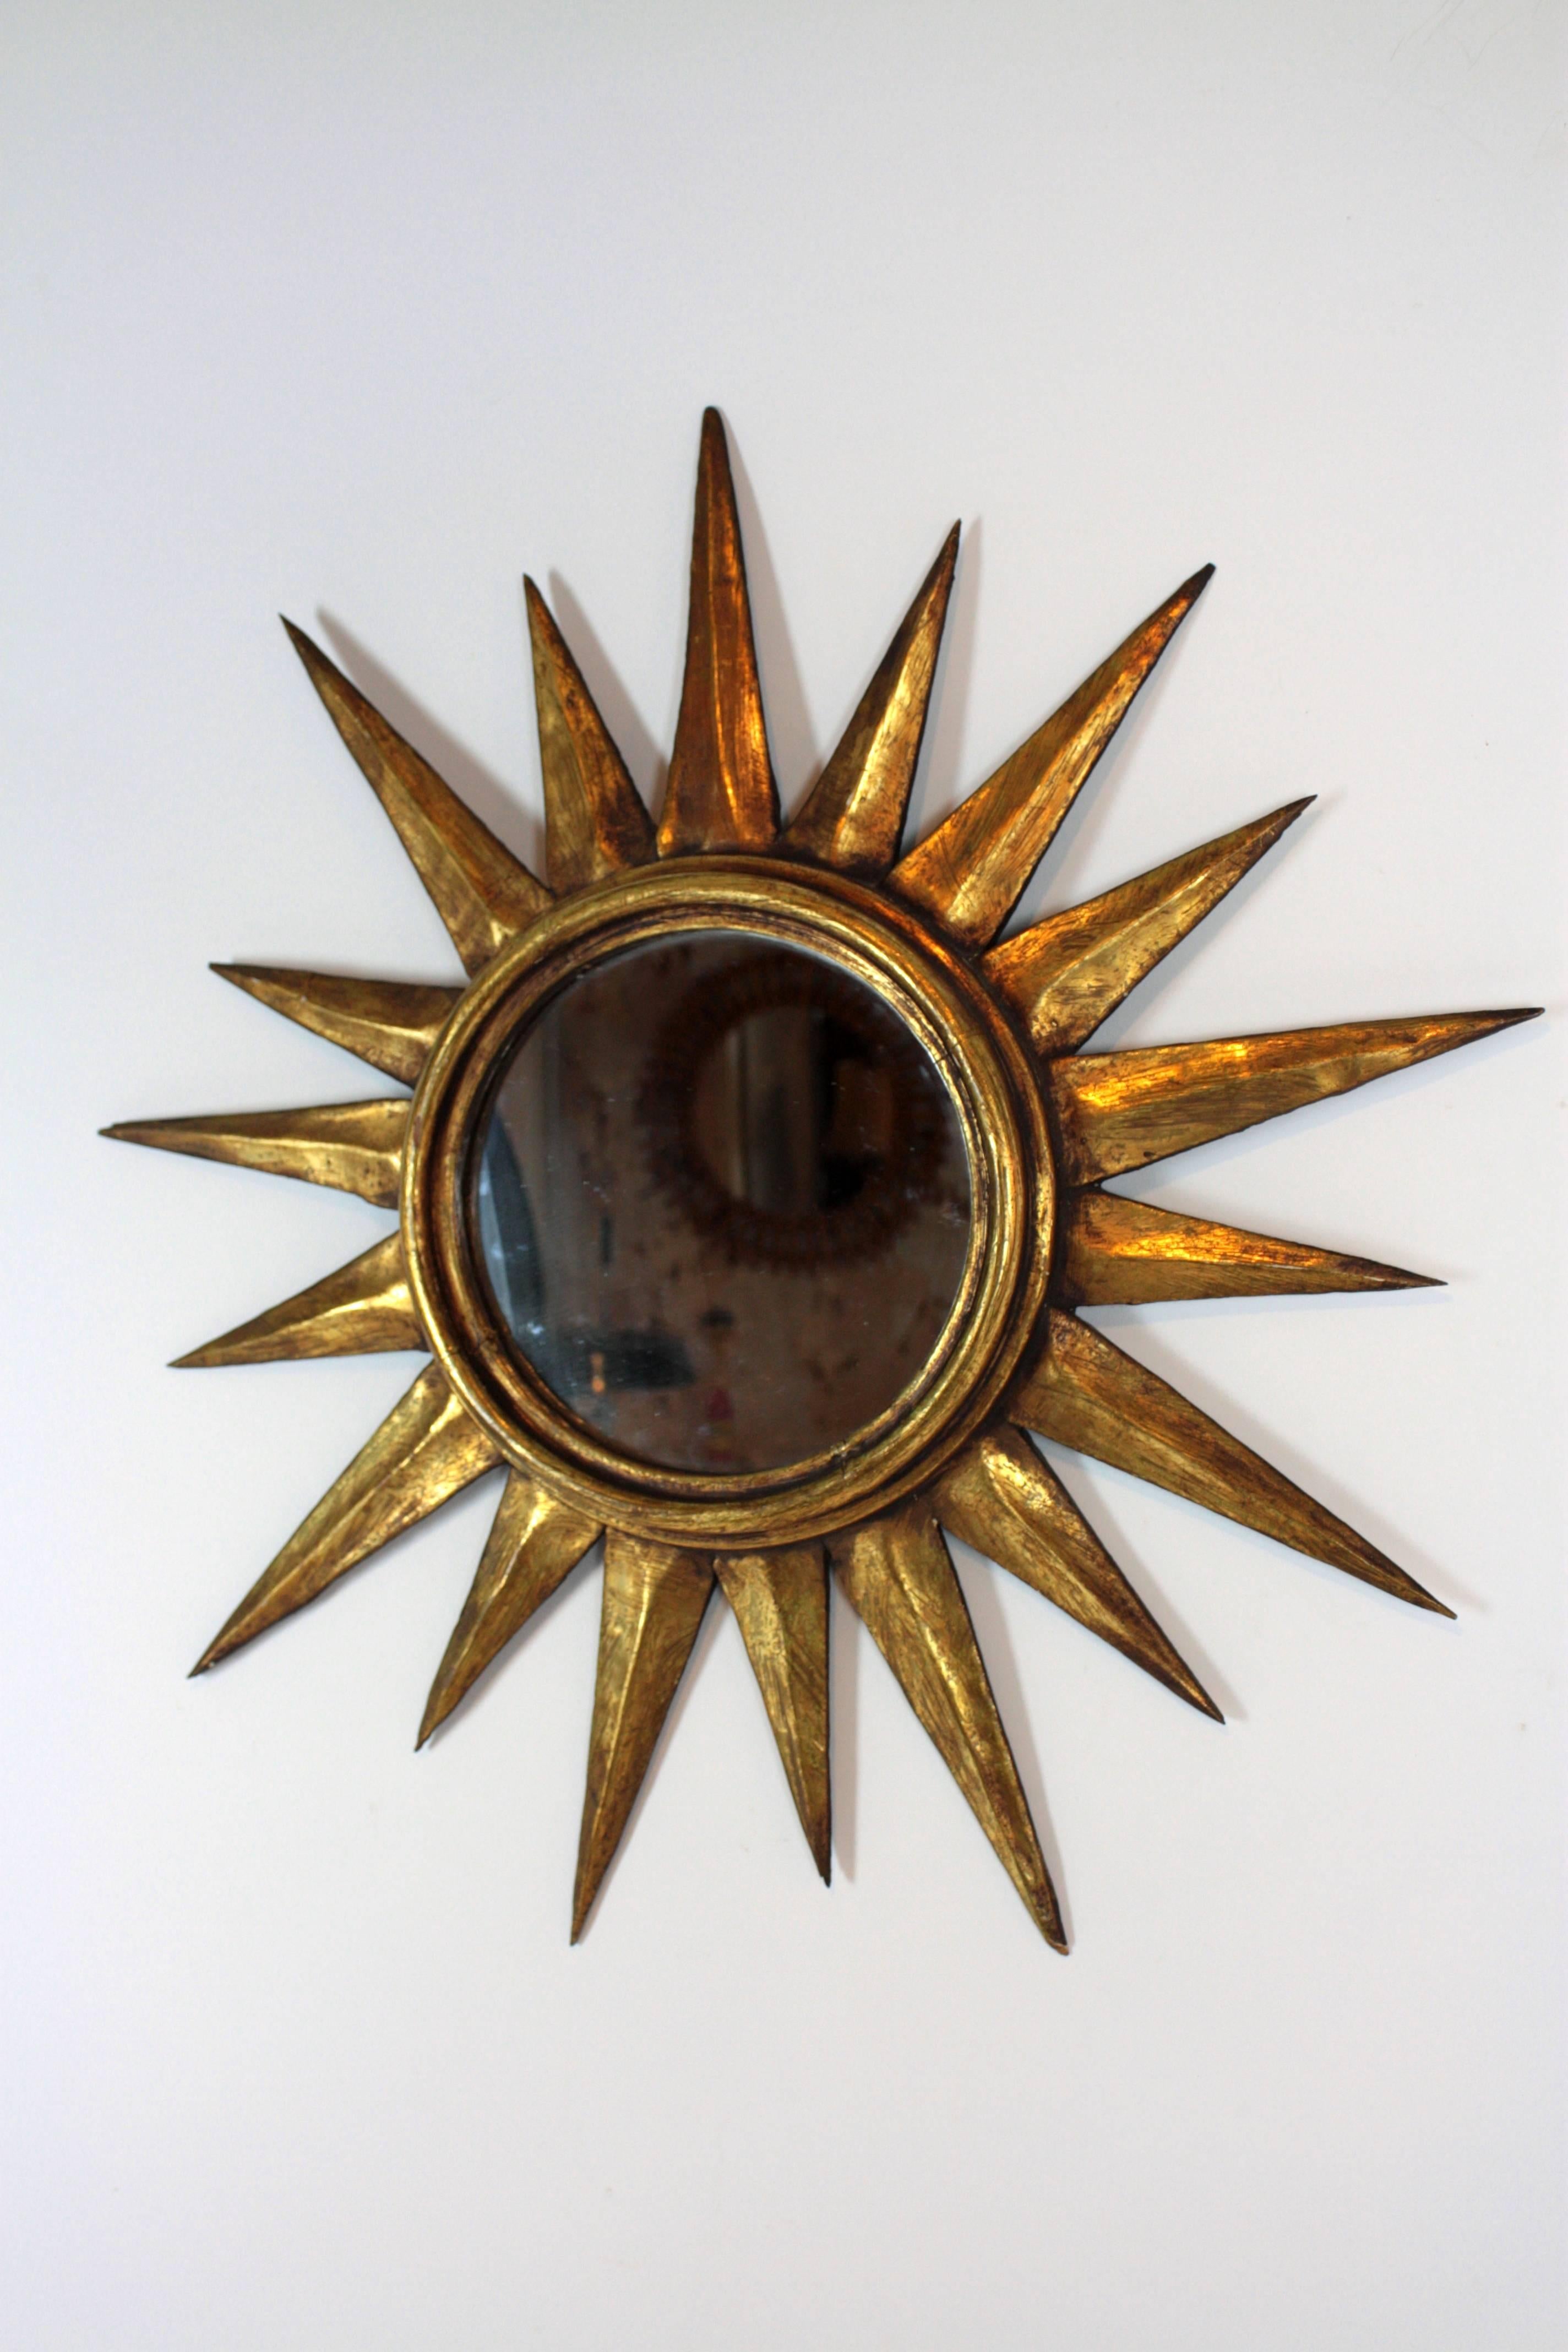 Amazing sunburst mirror in giltwood, gold leaf.

Beautiful shape with sunbeams in two sizes, lovely original patina.